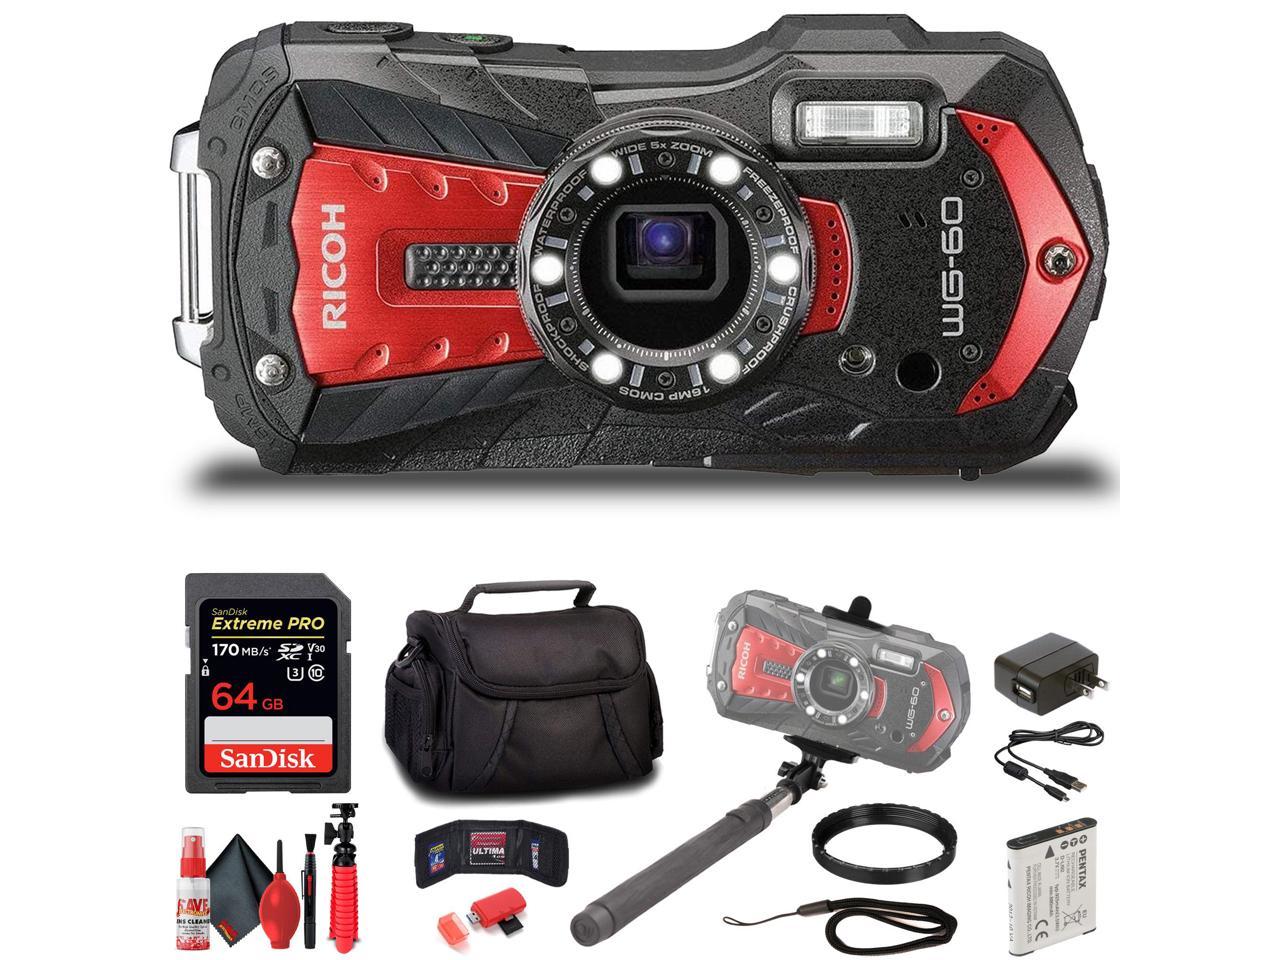 Ricoh WG-60 Digital Camera (Red) with Deluxe Accessory Kit